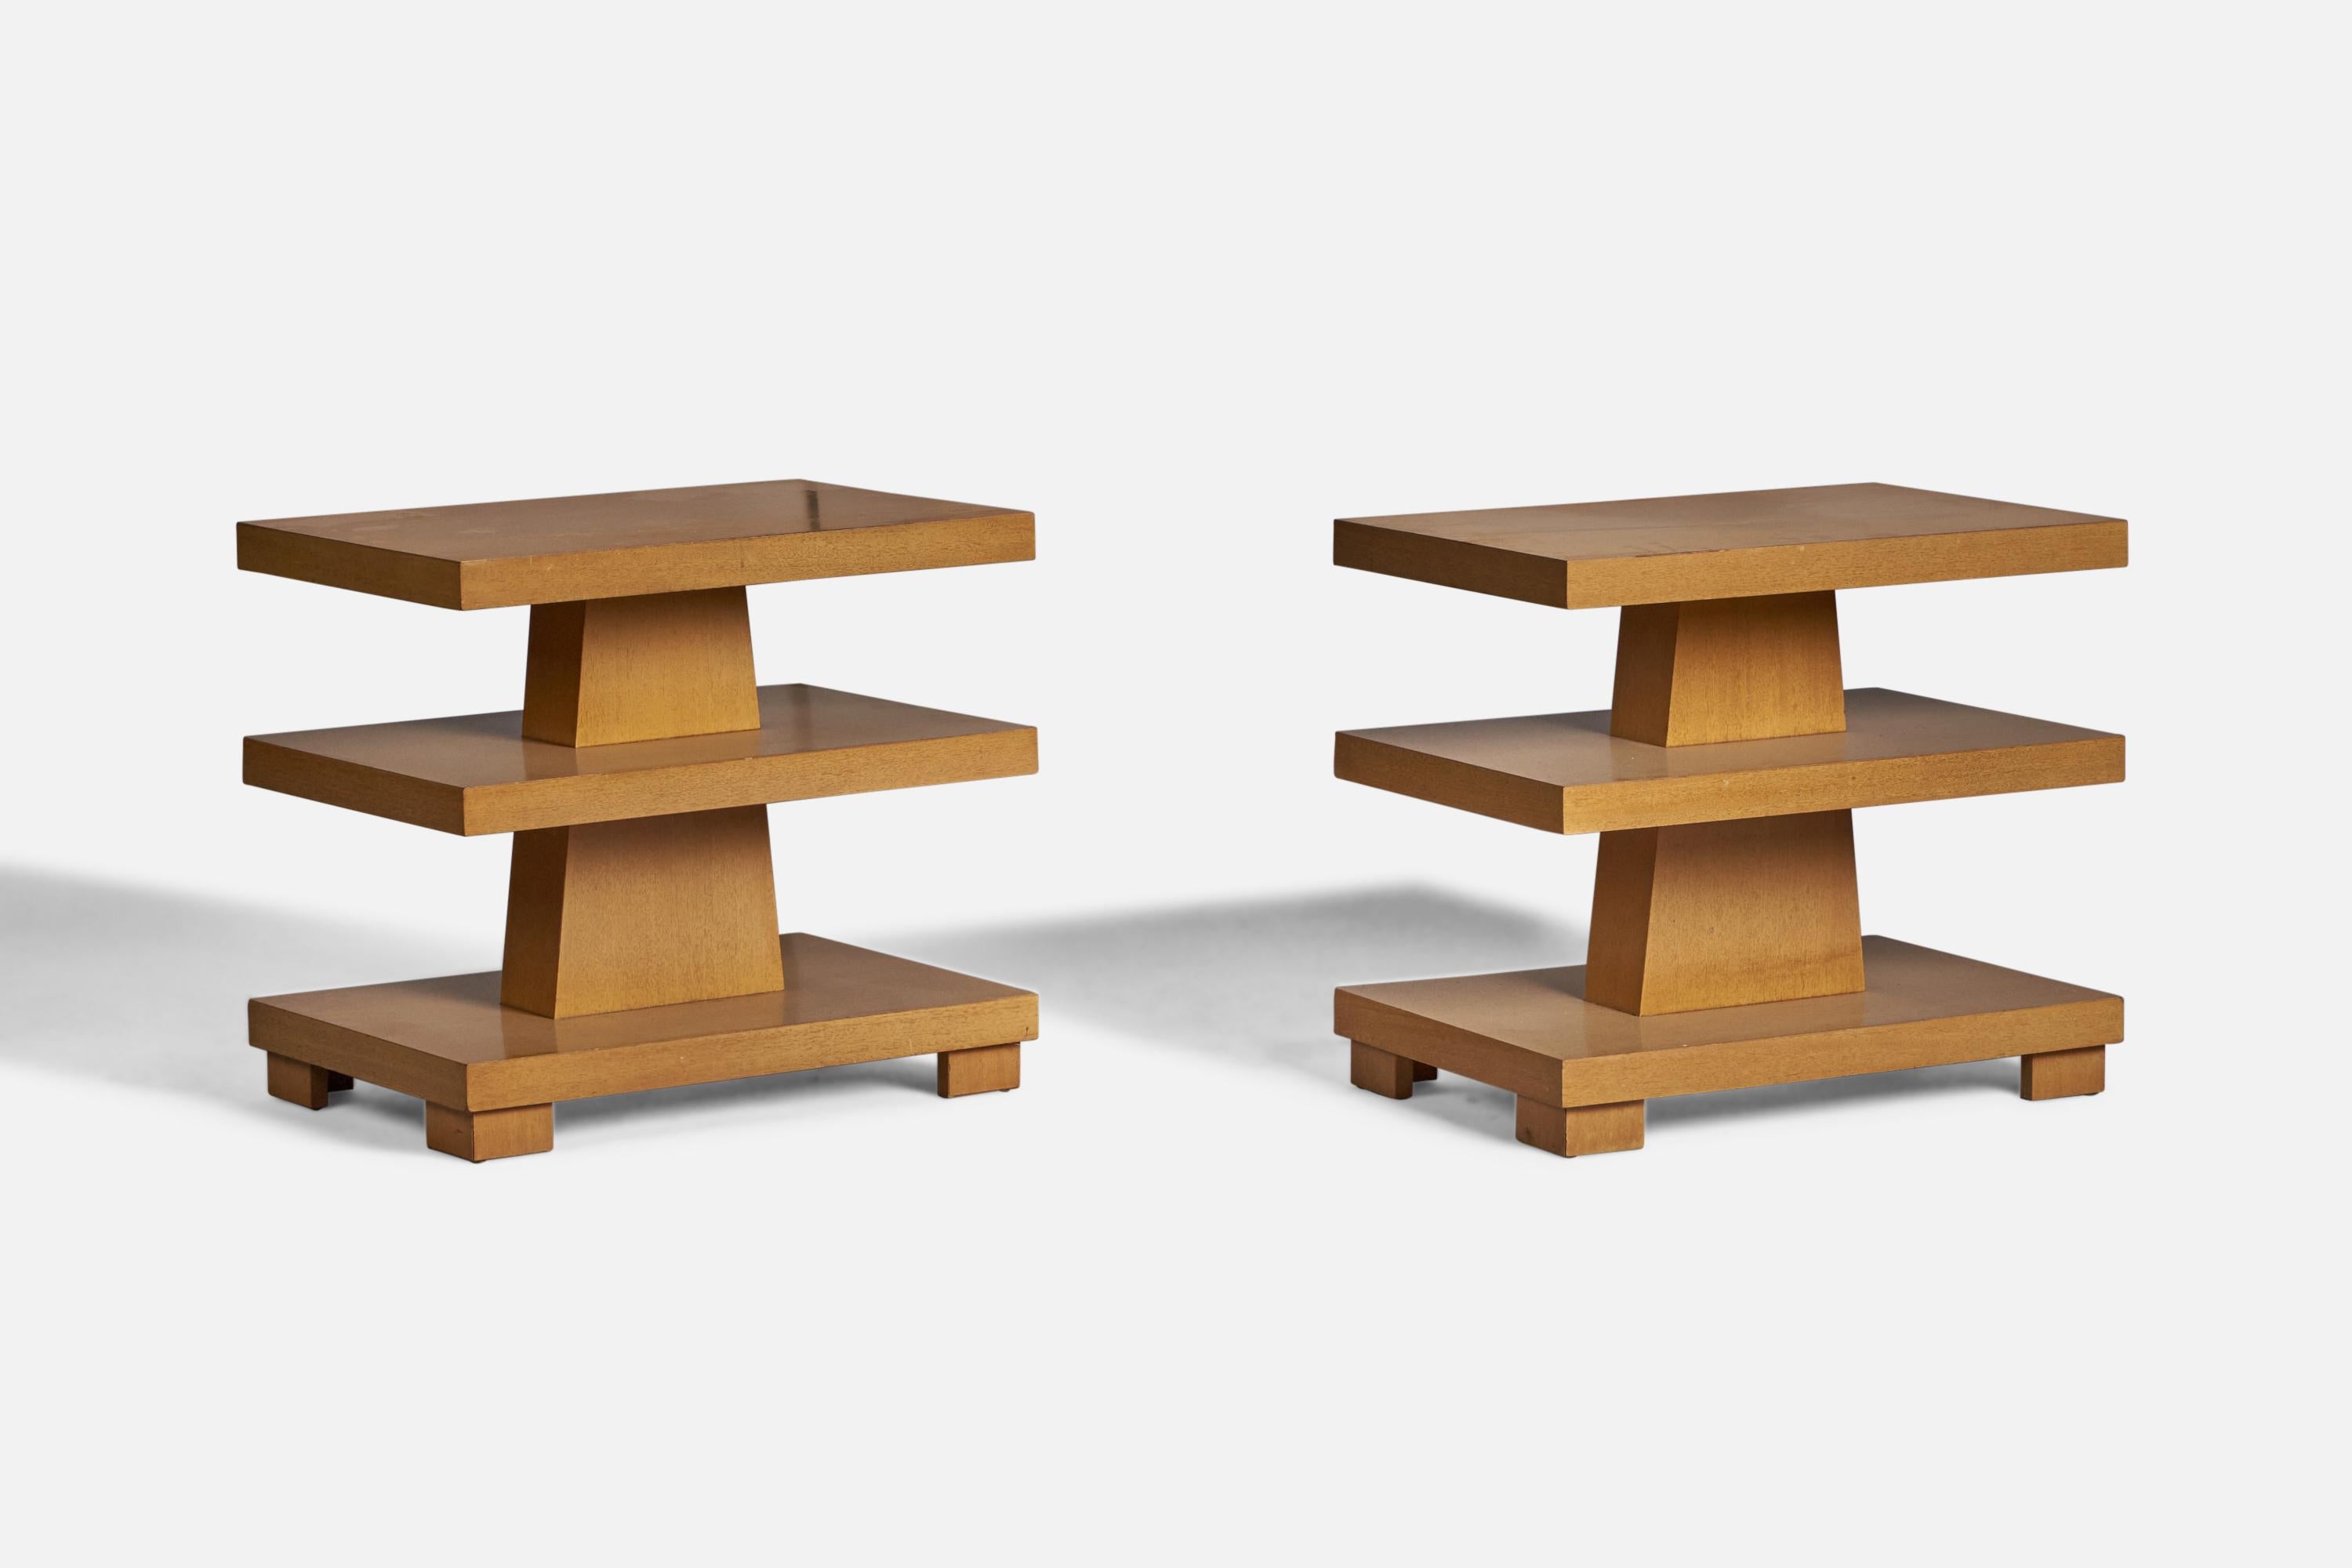 A pair of wood side tables designed and produced in the US, 1940s.